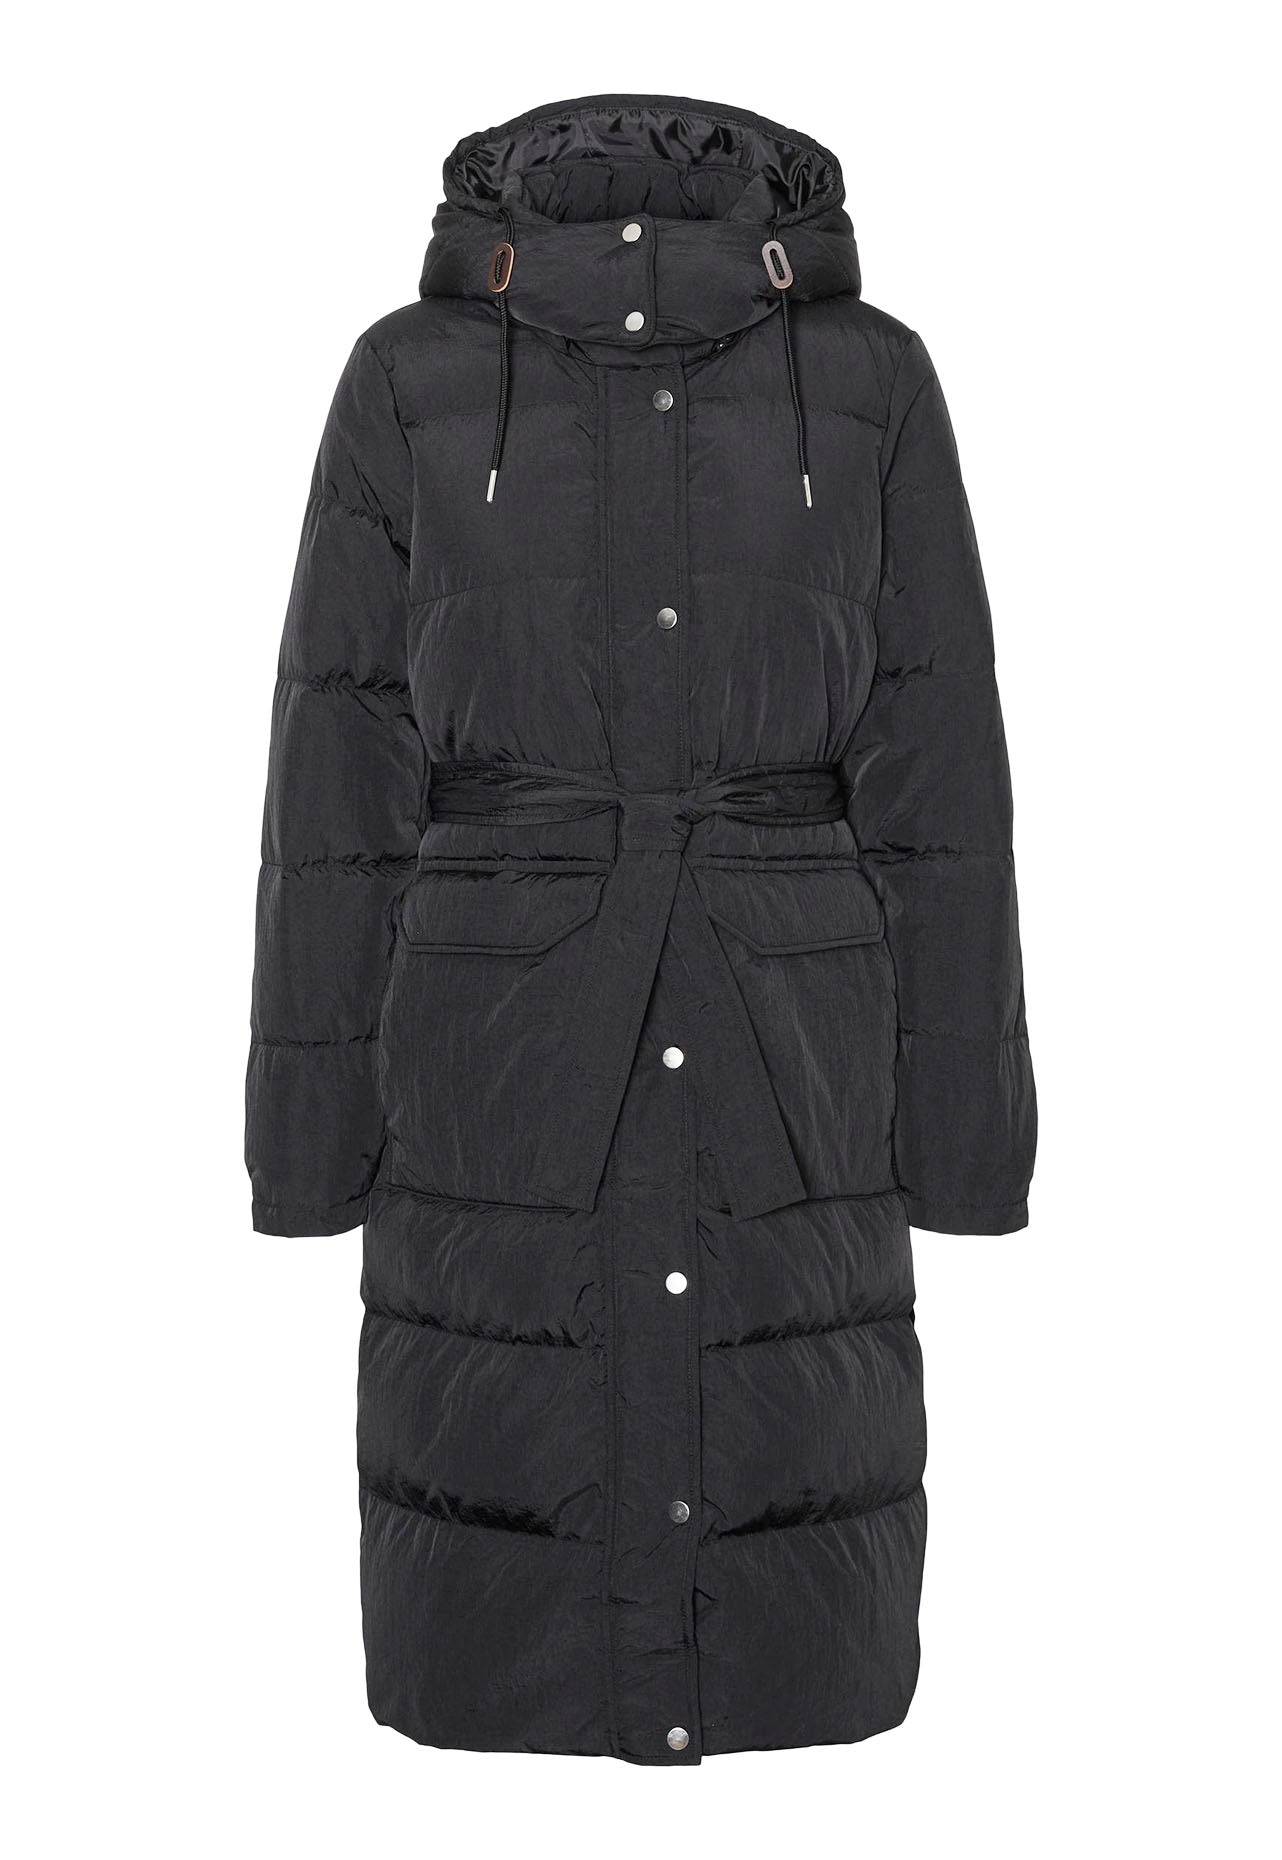 
                  
                    VERO MODA Signe Premium Longline Down Midi Puffer Coat with Belt & Removable Hood in Black - One Nation Clothing
                  
                